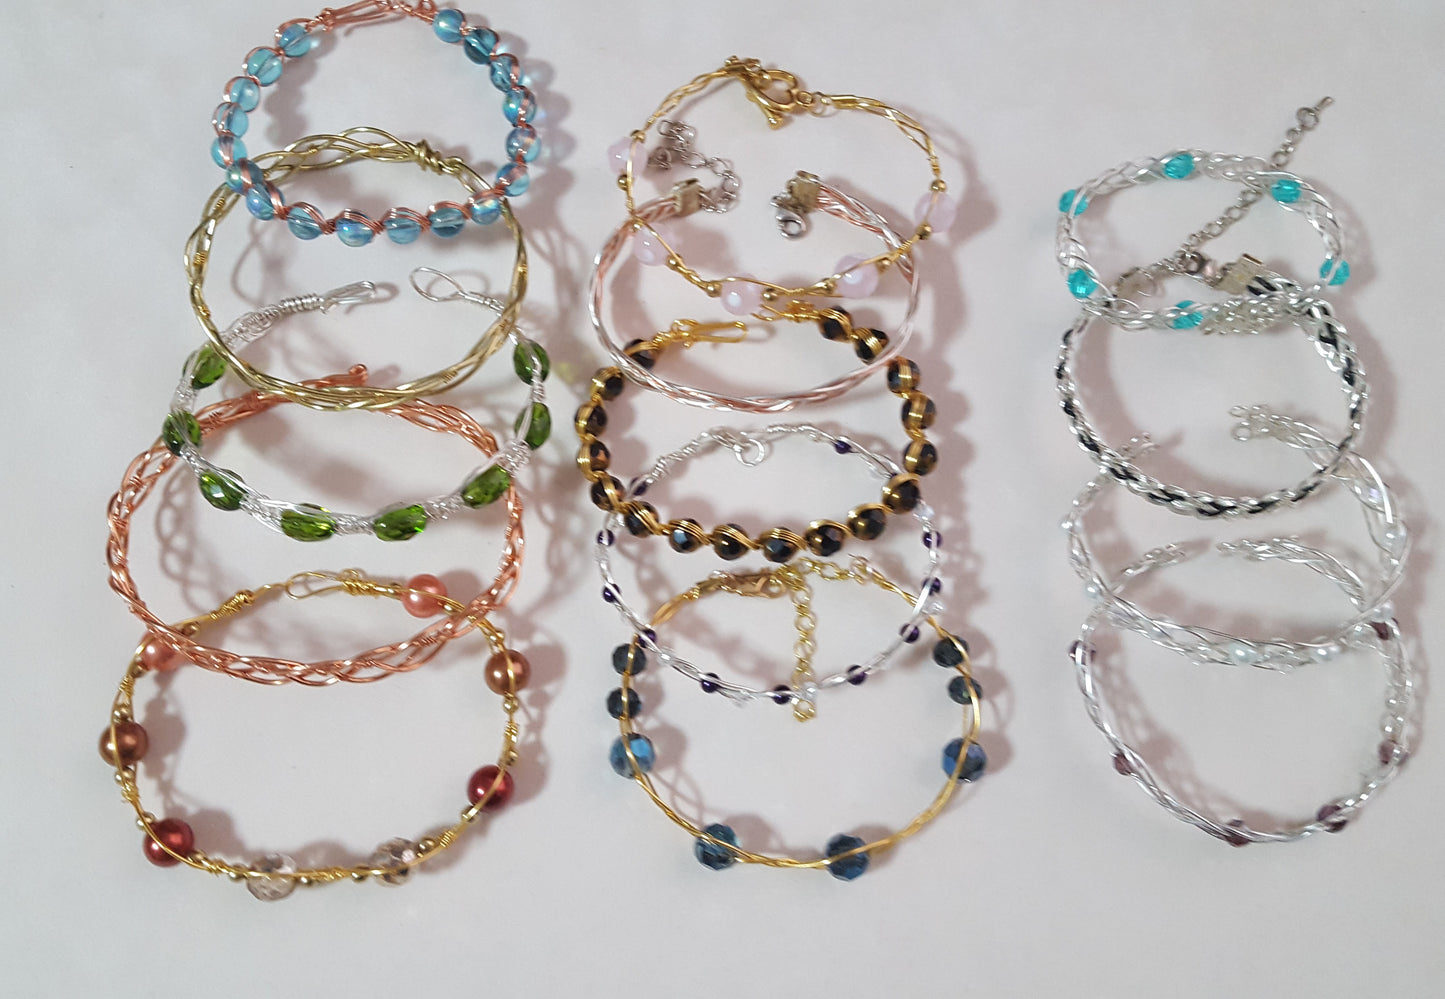 Braided Bracelets with Beads - Variety of Beads and Wire.